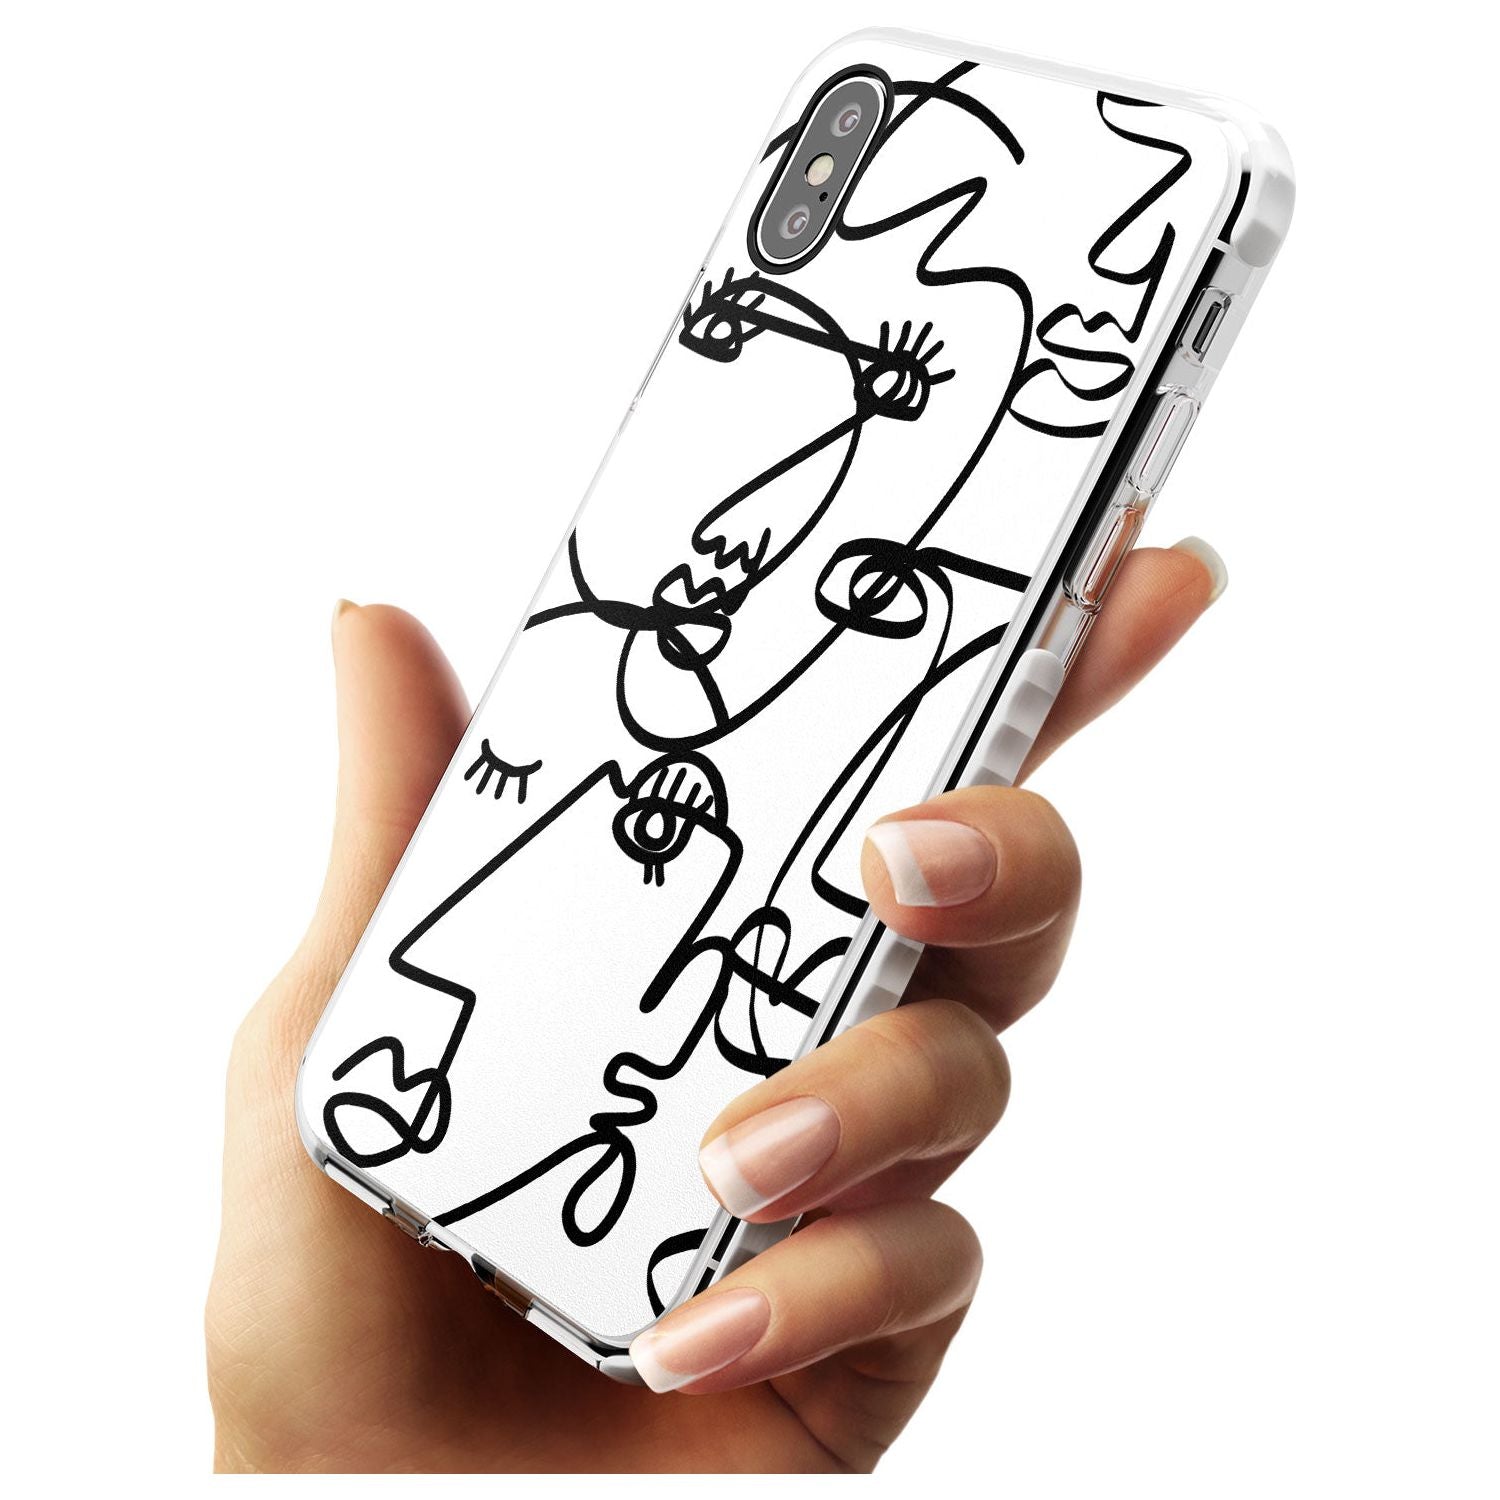 Continuous Line Faces: Black on White Slim TPU Phone Case Warehouse X XS Max XR